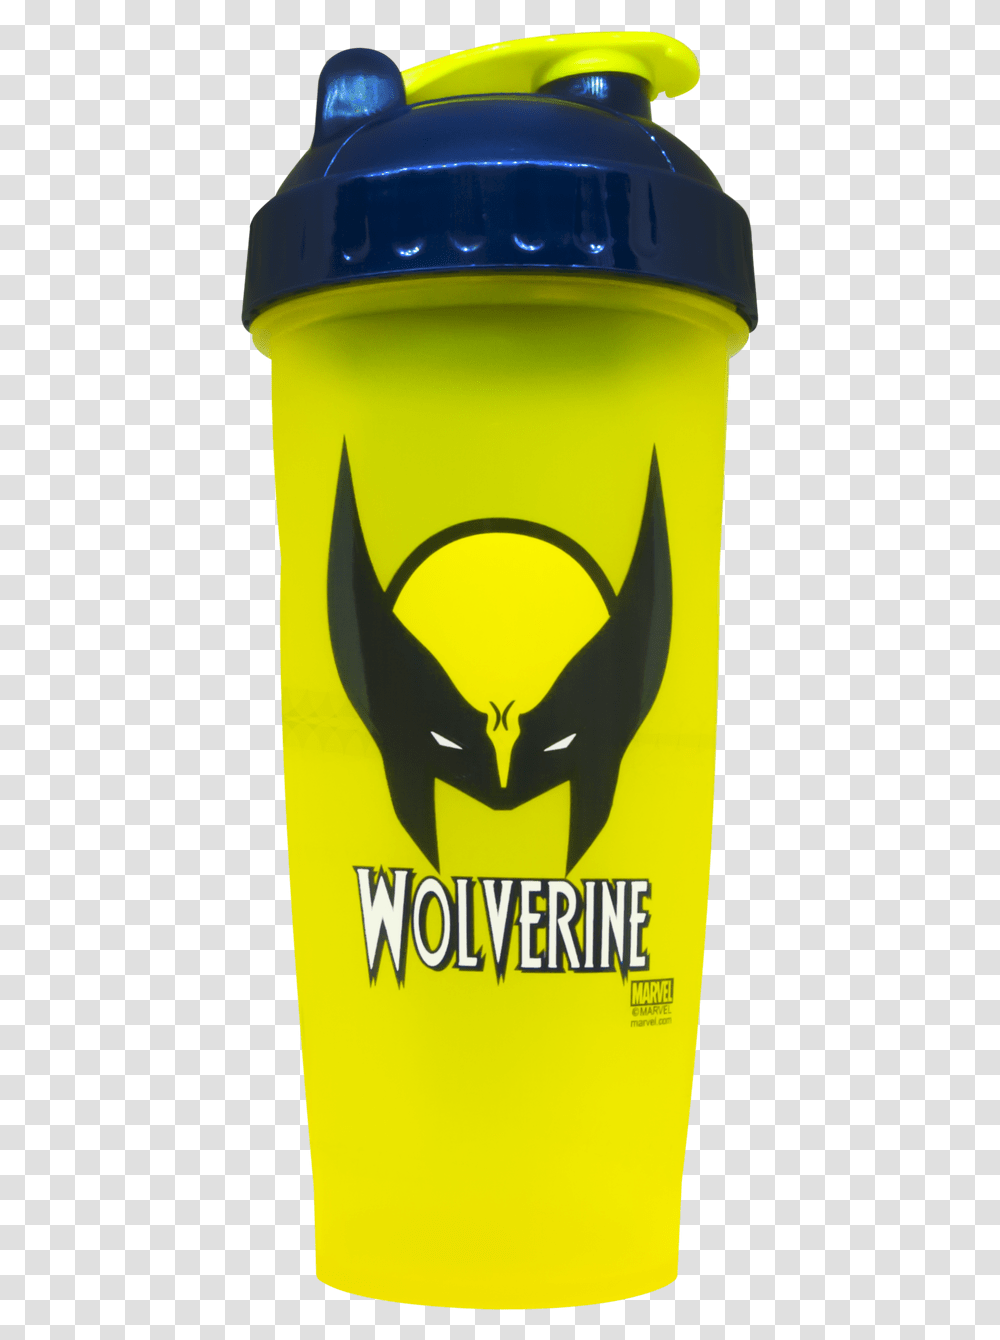 Perfect Shaker Wolverine Download Wolverine Shaker, Poster, Advertisement, Flyer, Paper Transparent Png